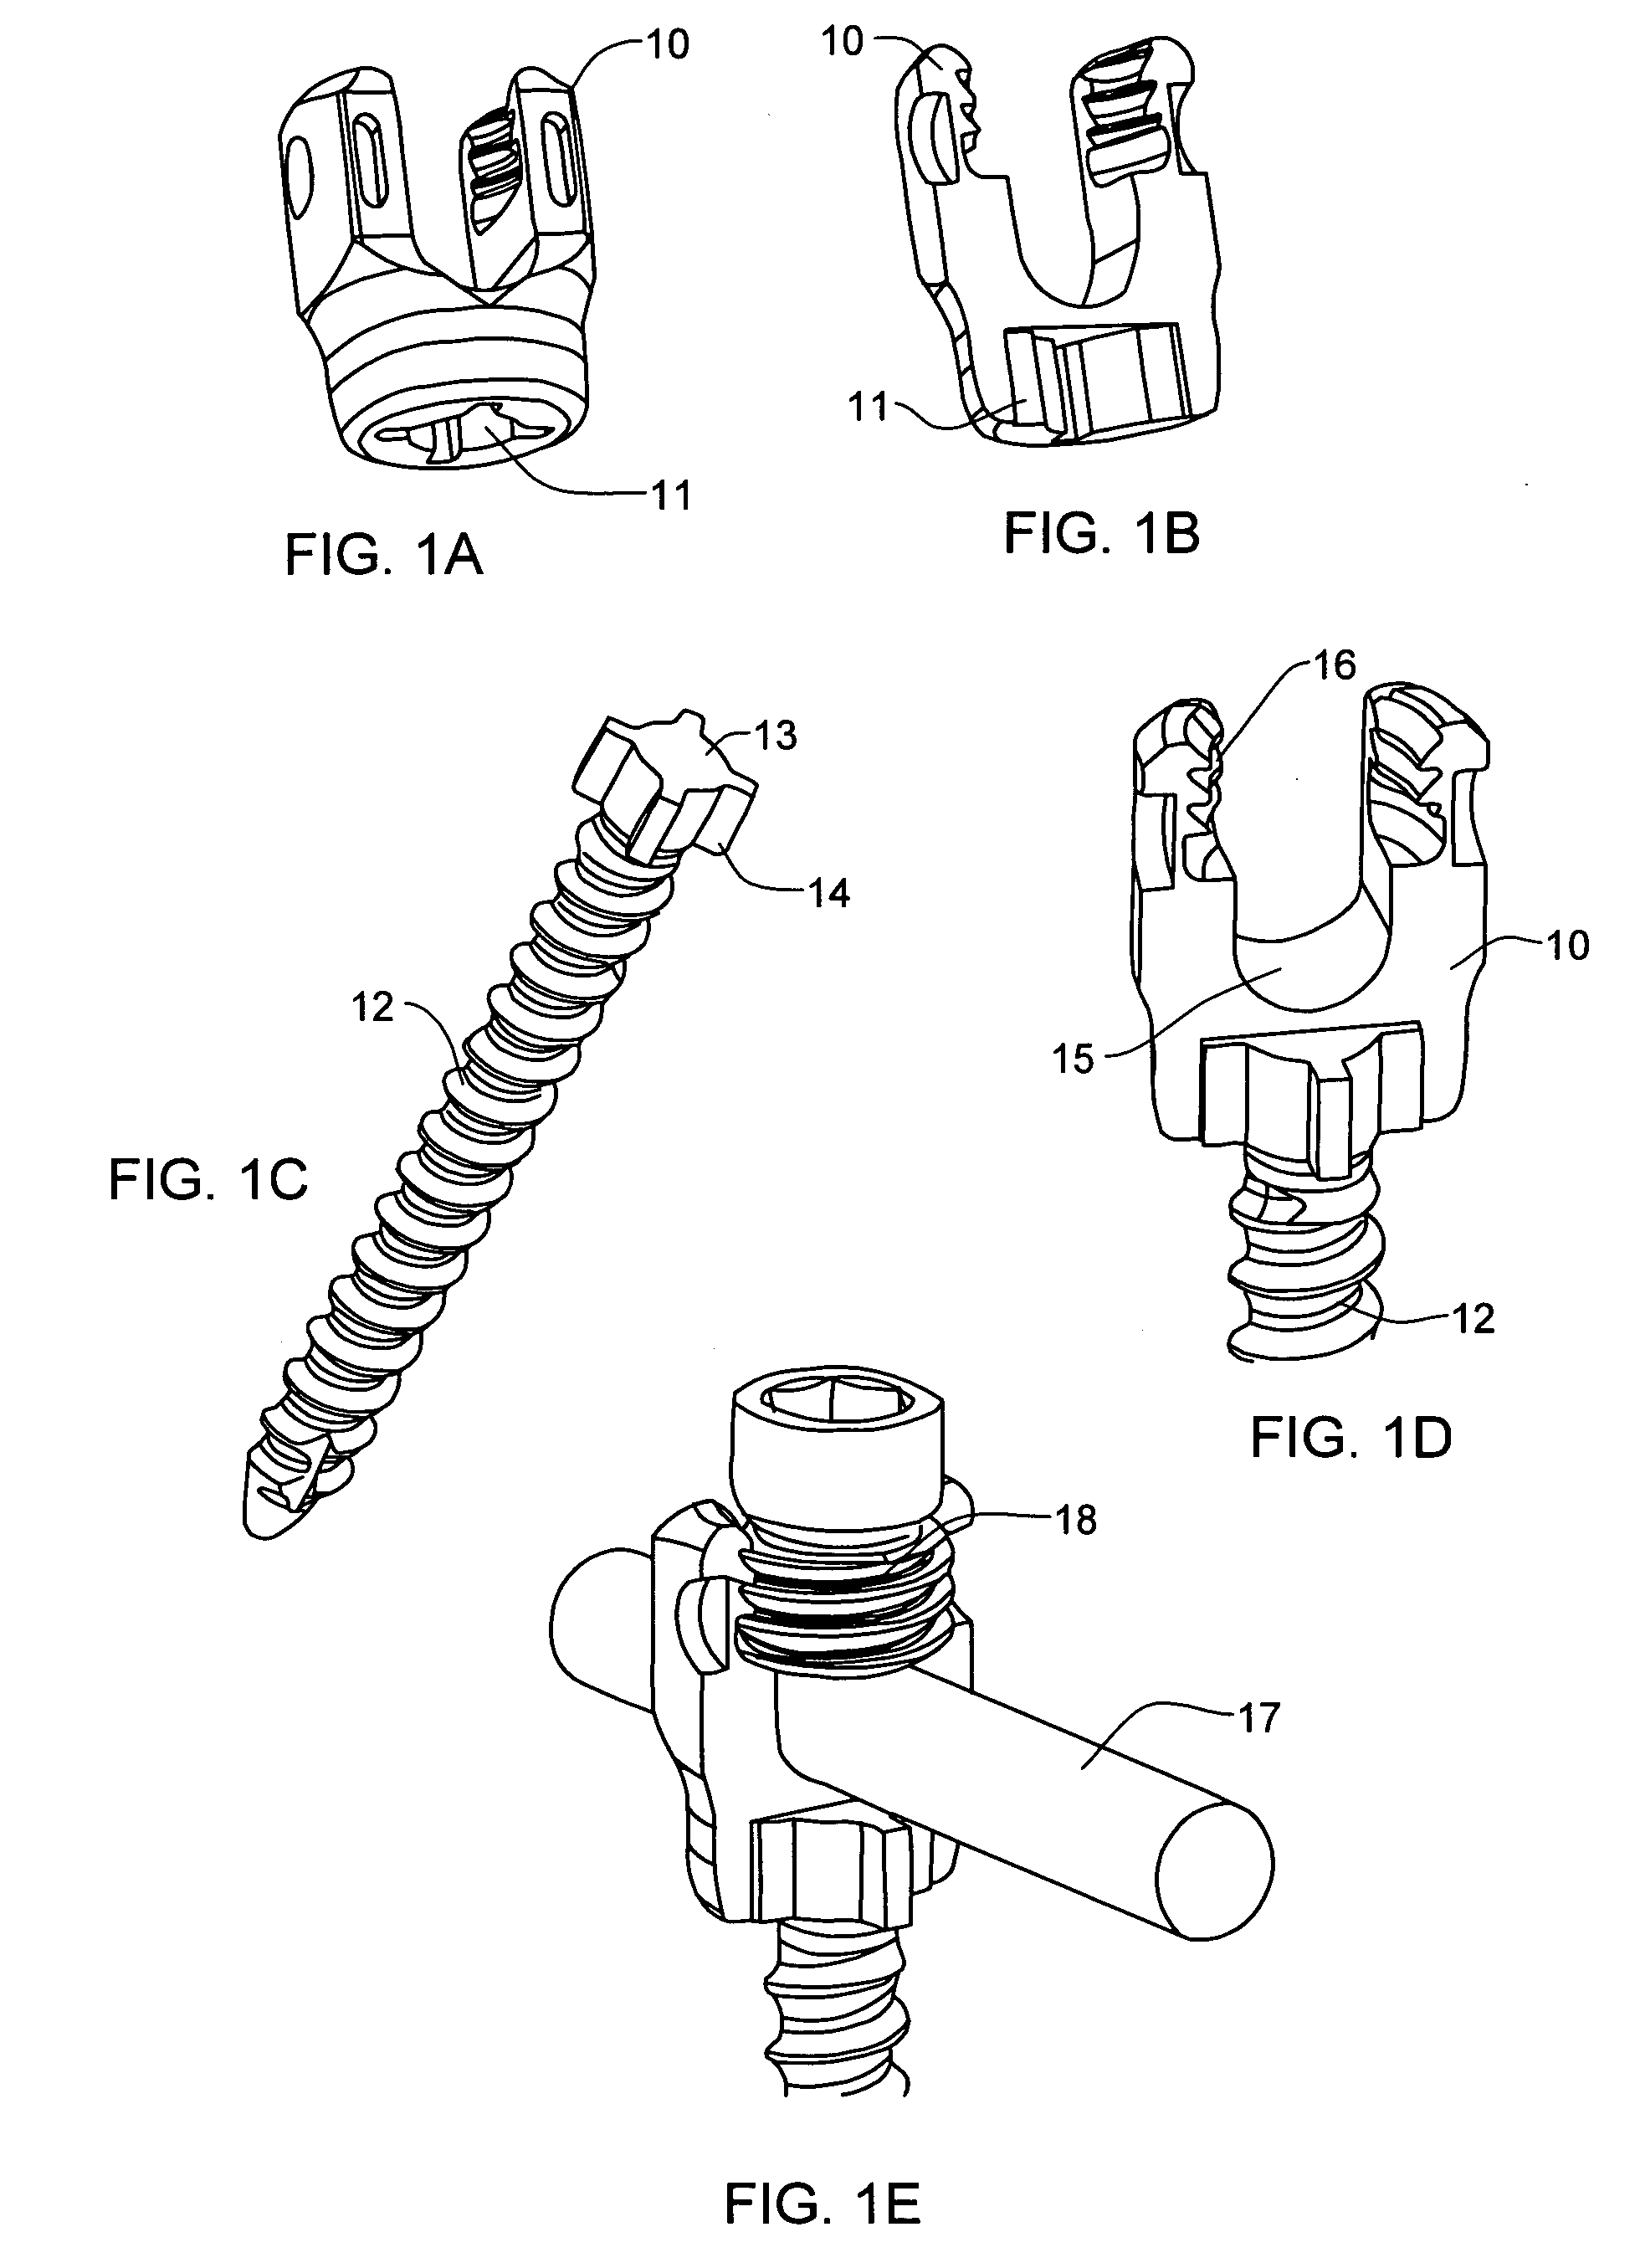 Bone anchor system utilizing a molded coupling member for coupling a bone anchor to a stabilization member and method therefor